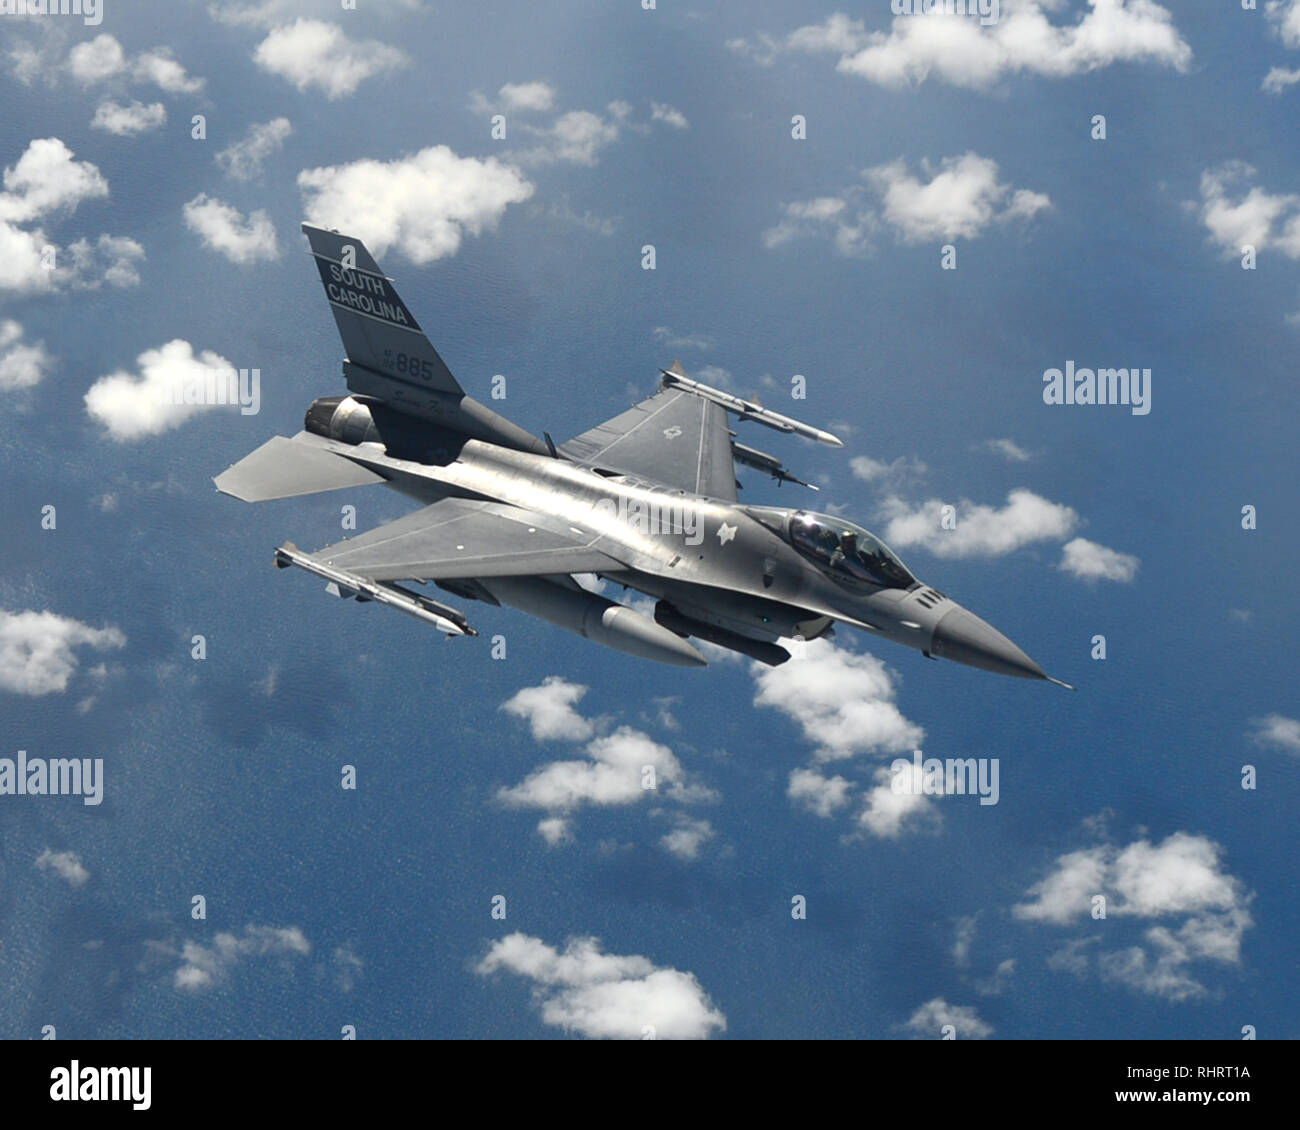 F-16 Falcons from the 169th Fighter Wing, McEntire Joint National Guard Base, South Carolina refuel off the East coast of S.C. from a KC-135 Stratotanker from the 134th Air Refueling Wing McGhee Tyson ANGB, Tenn. Sept. 21, 2016. (U.S. Air National Guard photo by TSgt. Daniel Gagnon) Stock Photo